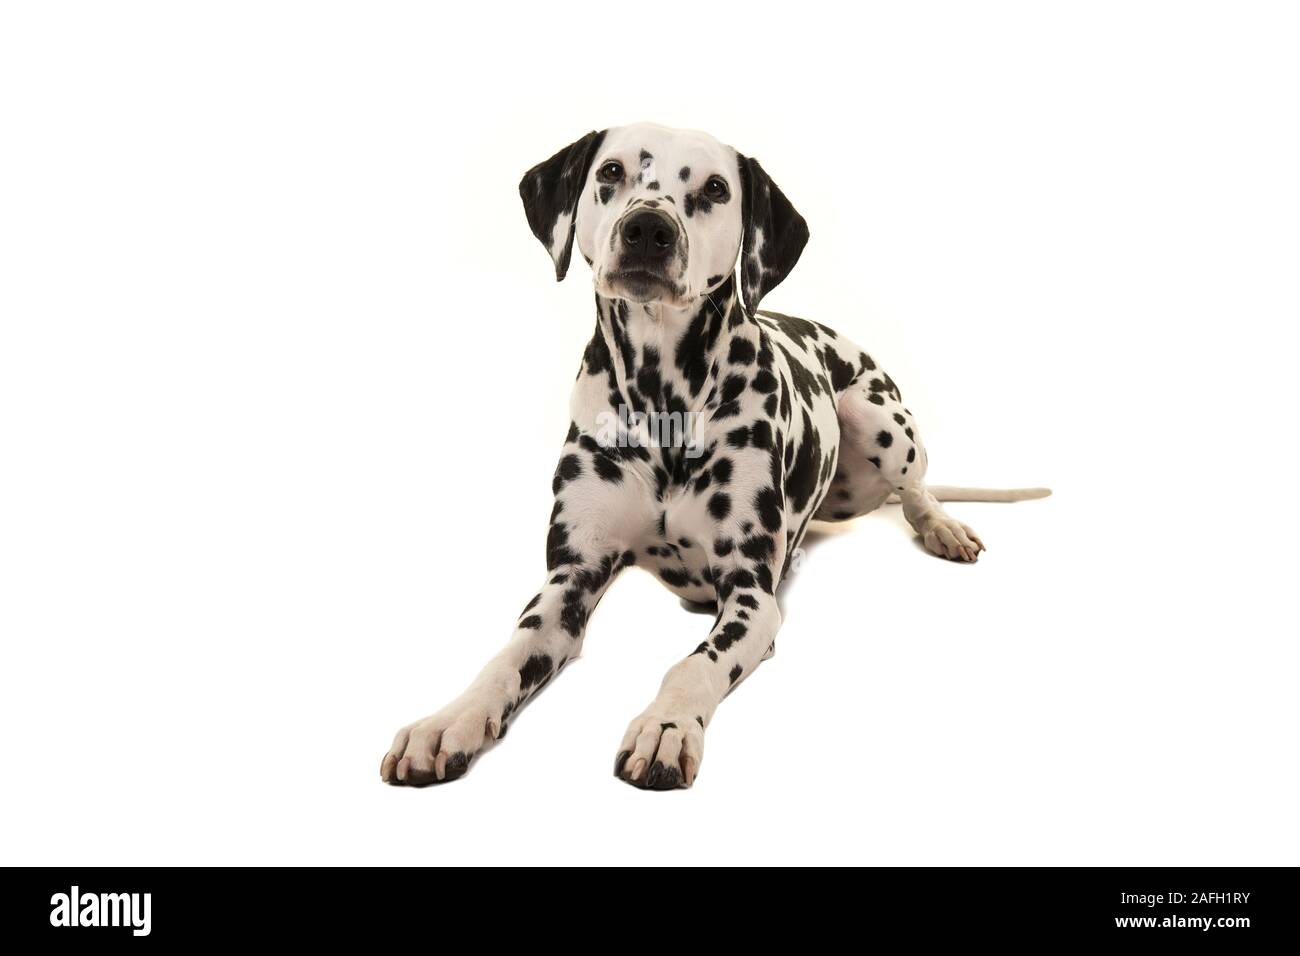 Dalmatian dog lying down looking at camera isolated on a white background Stock Photo